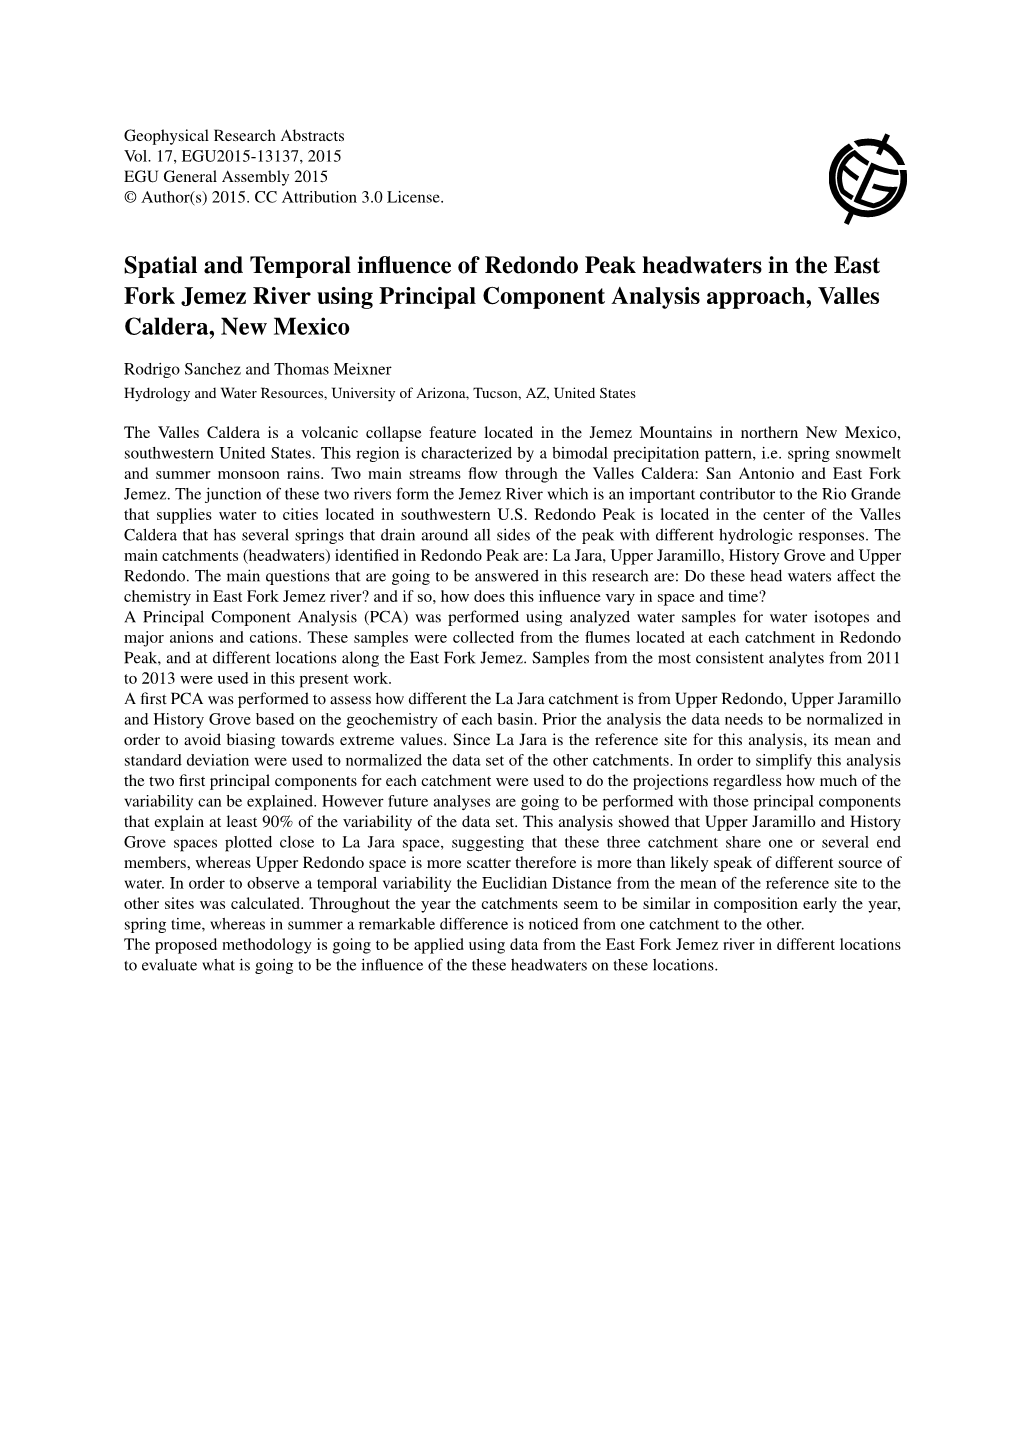 Spatial and Temporal Influence of Redondo Peak Headwaters in The